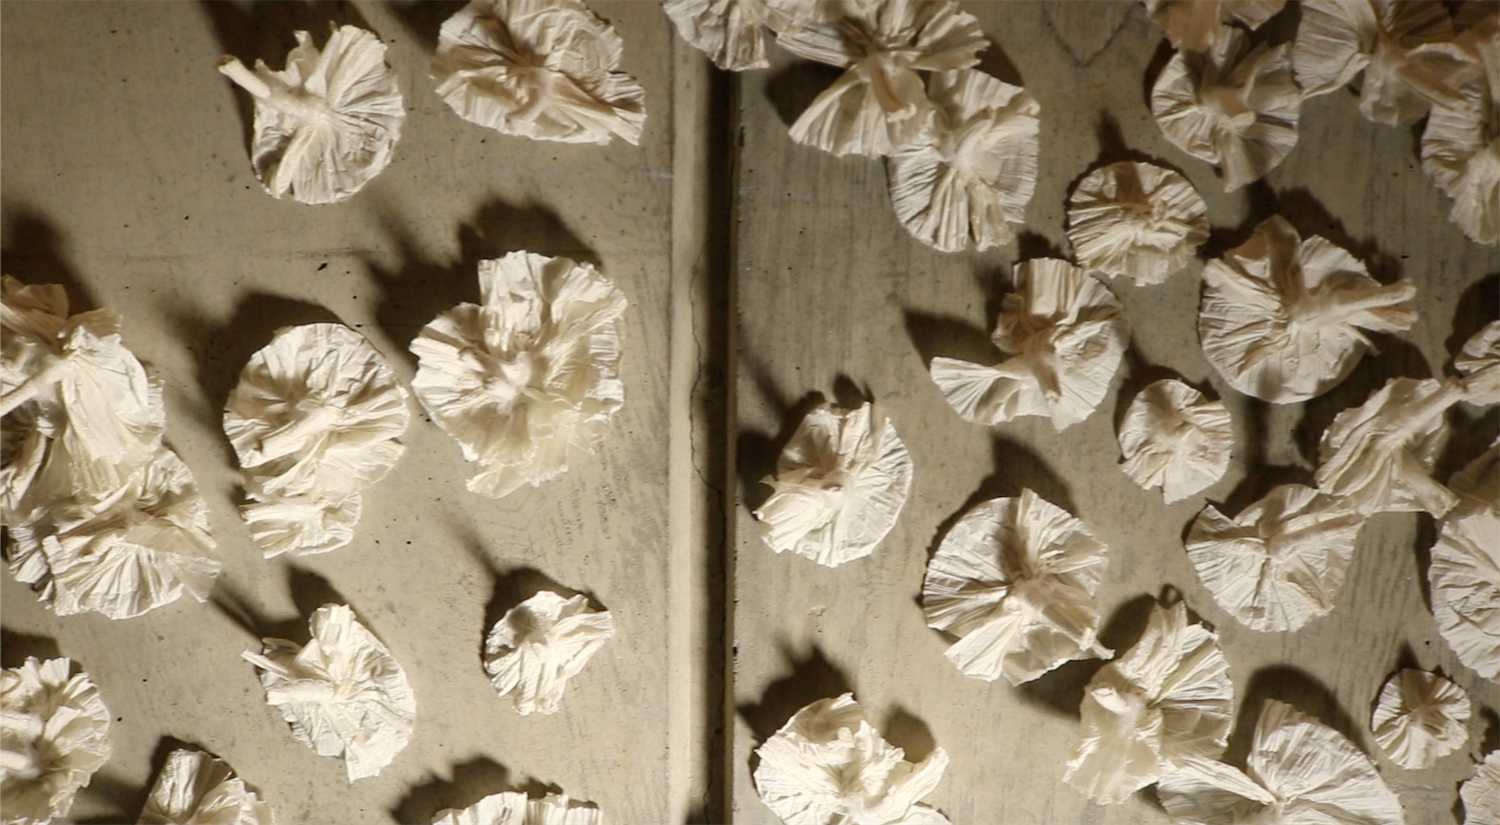 A process photo from the installation. Individual units that look like flowers adhered to the wall.